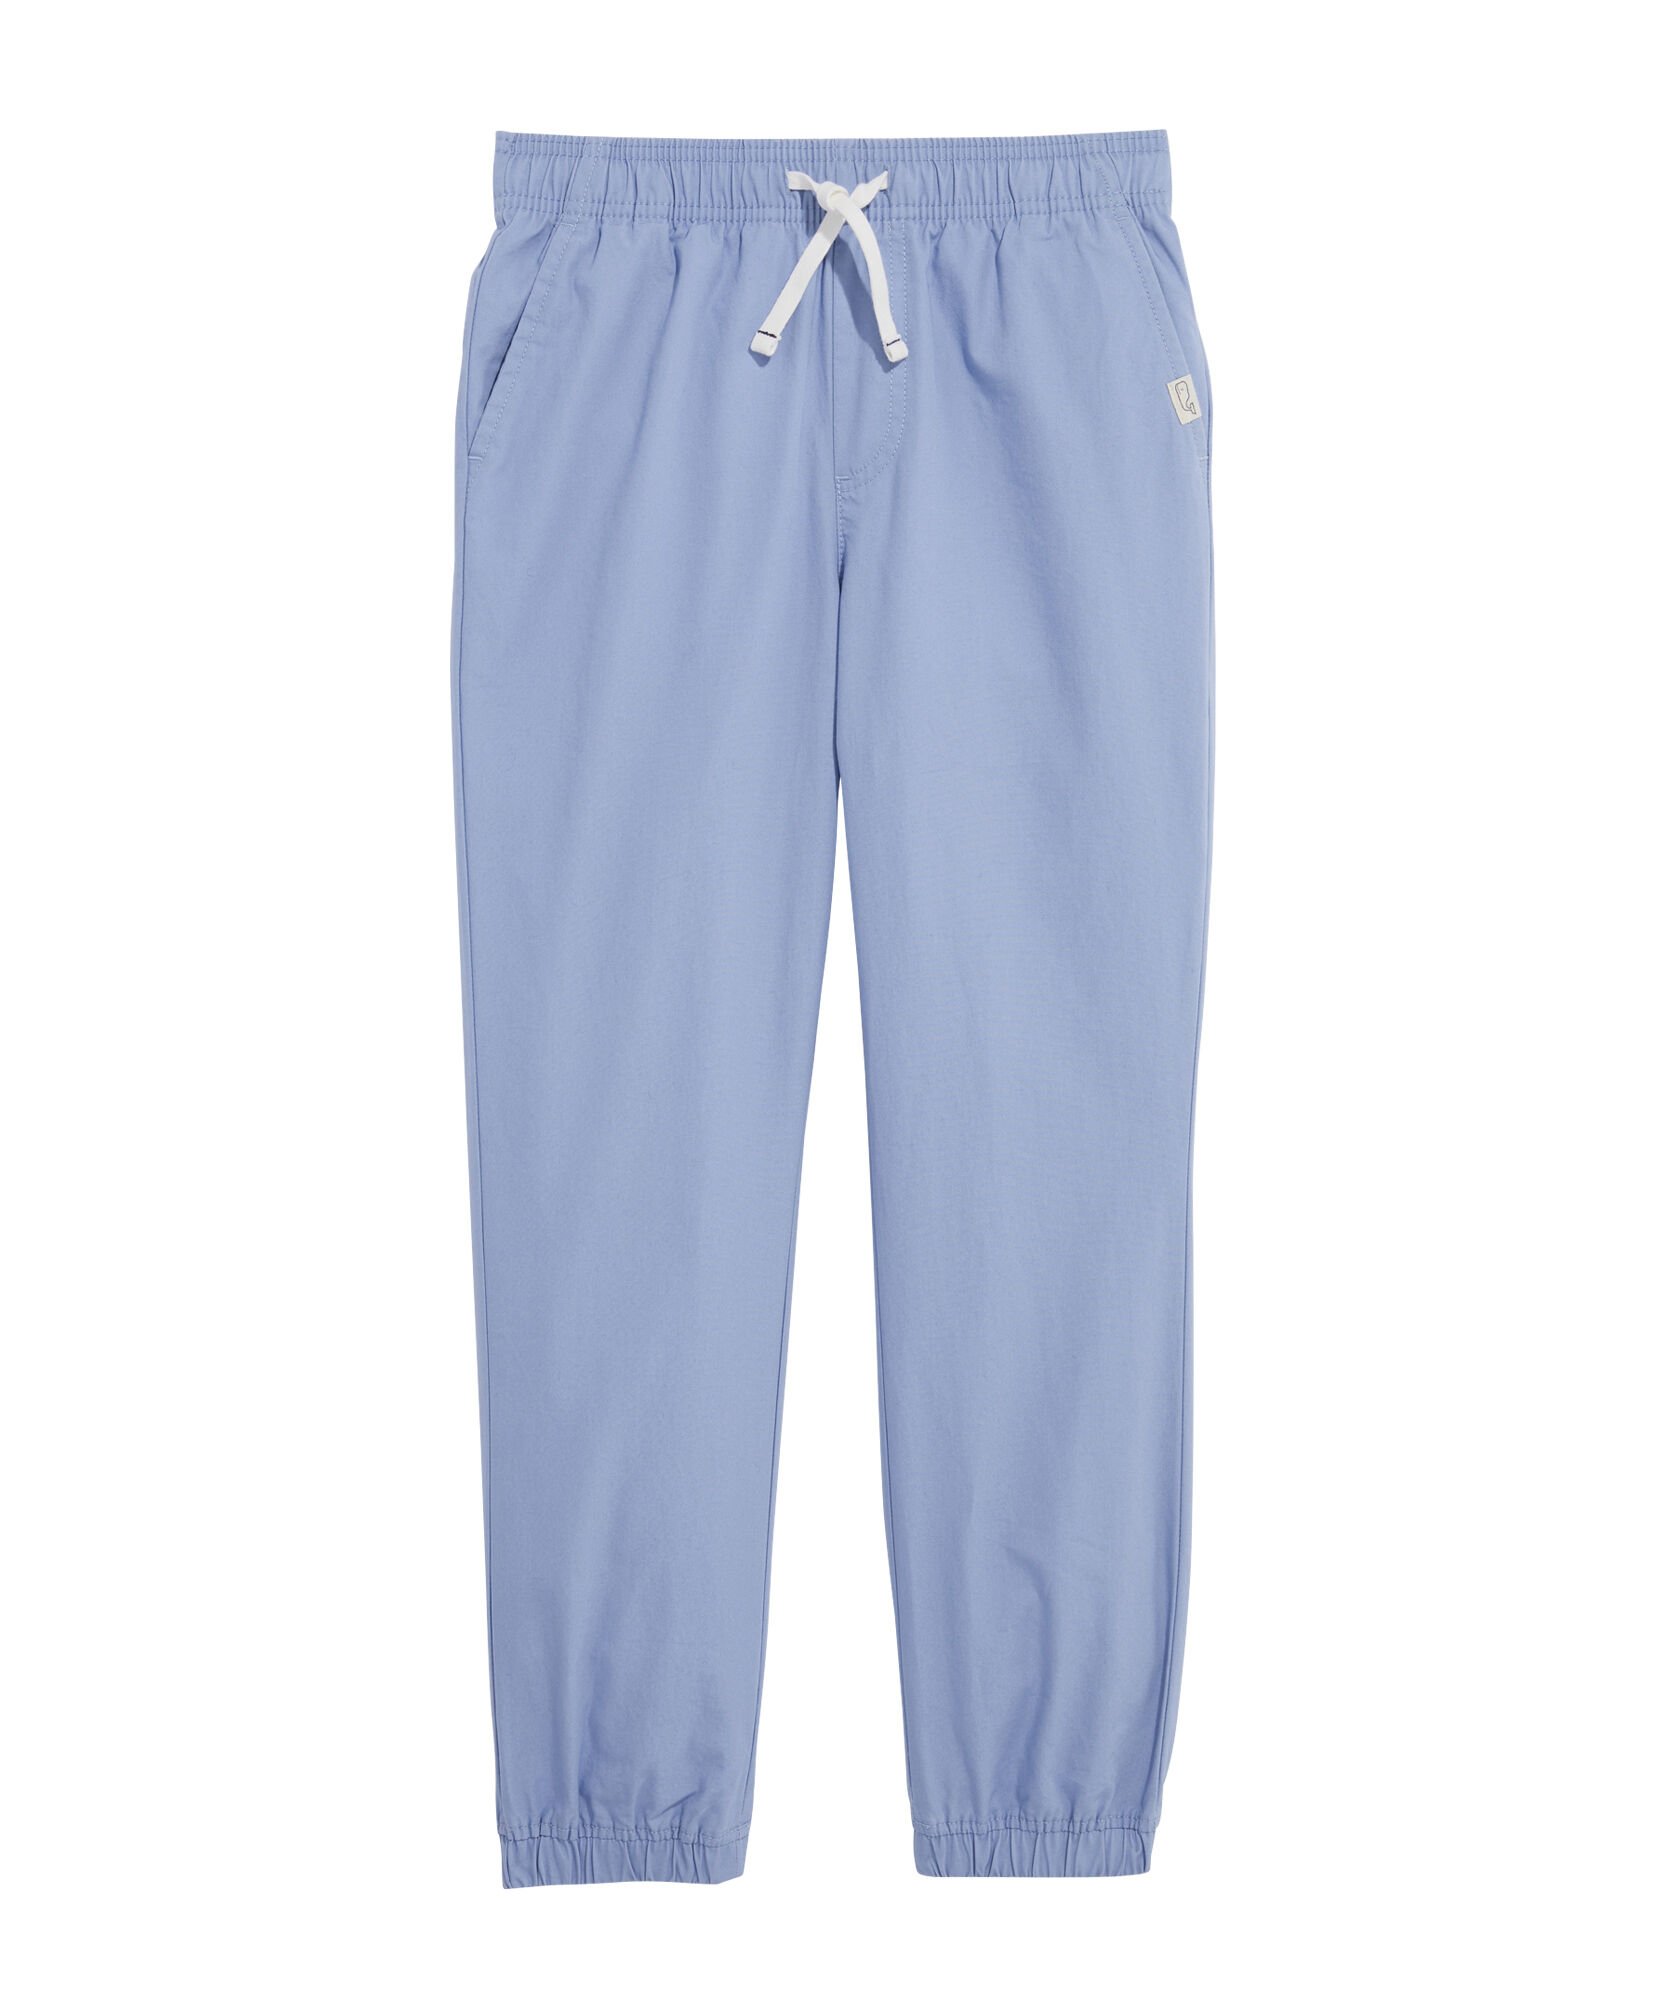 OUTLET Boys' Chino Pull-On Pants